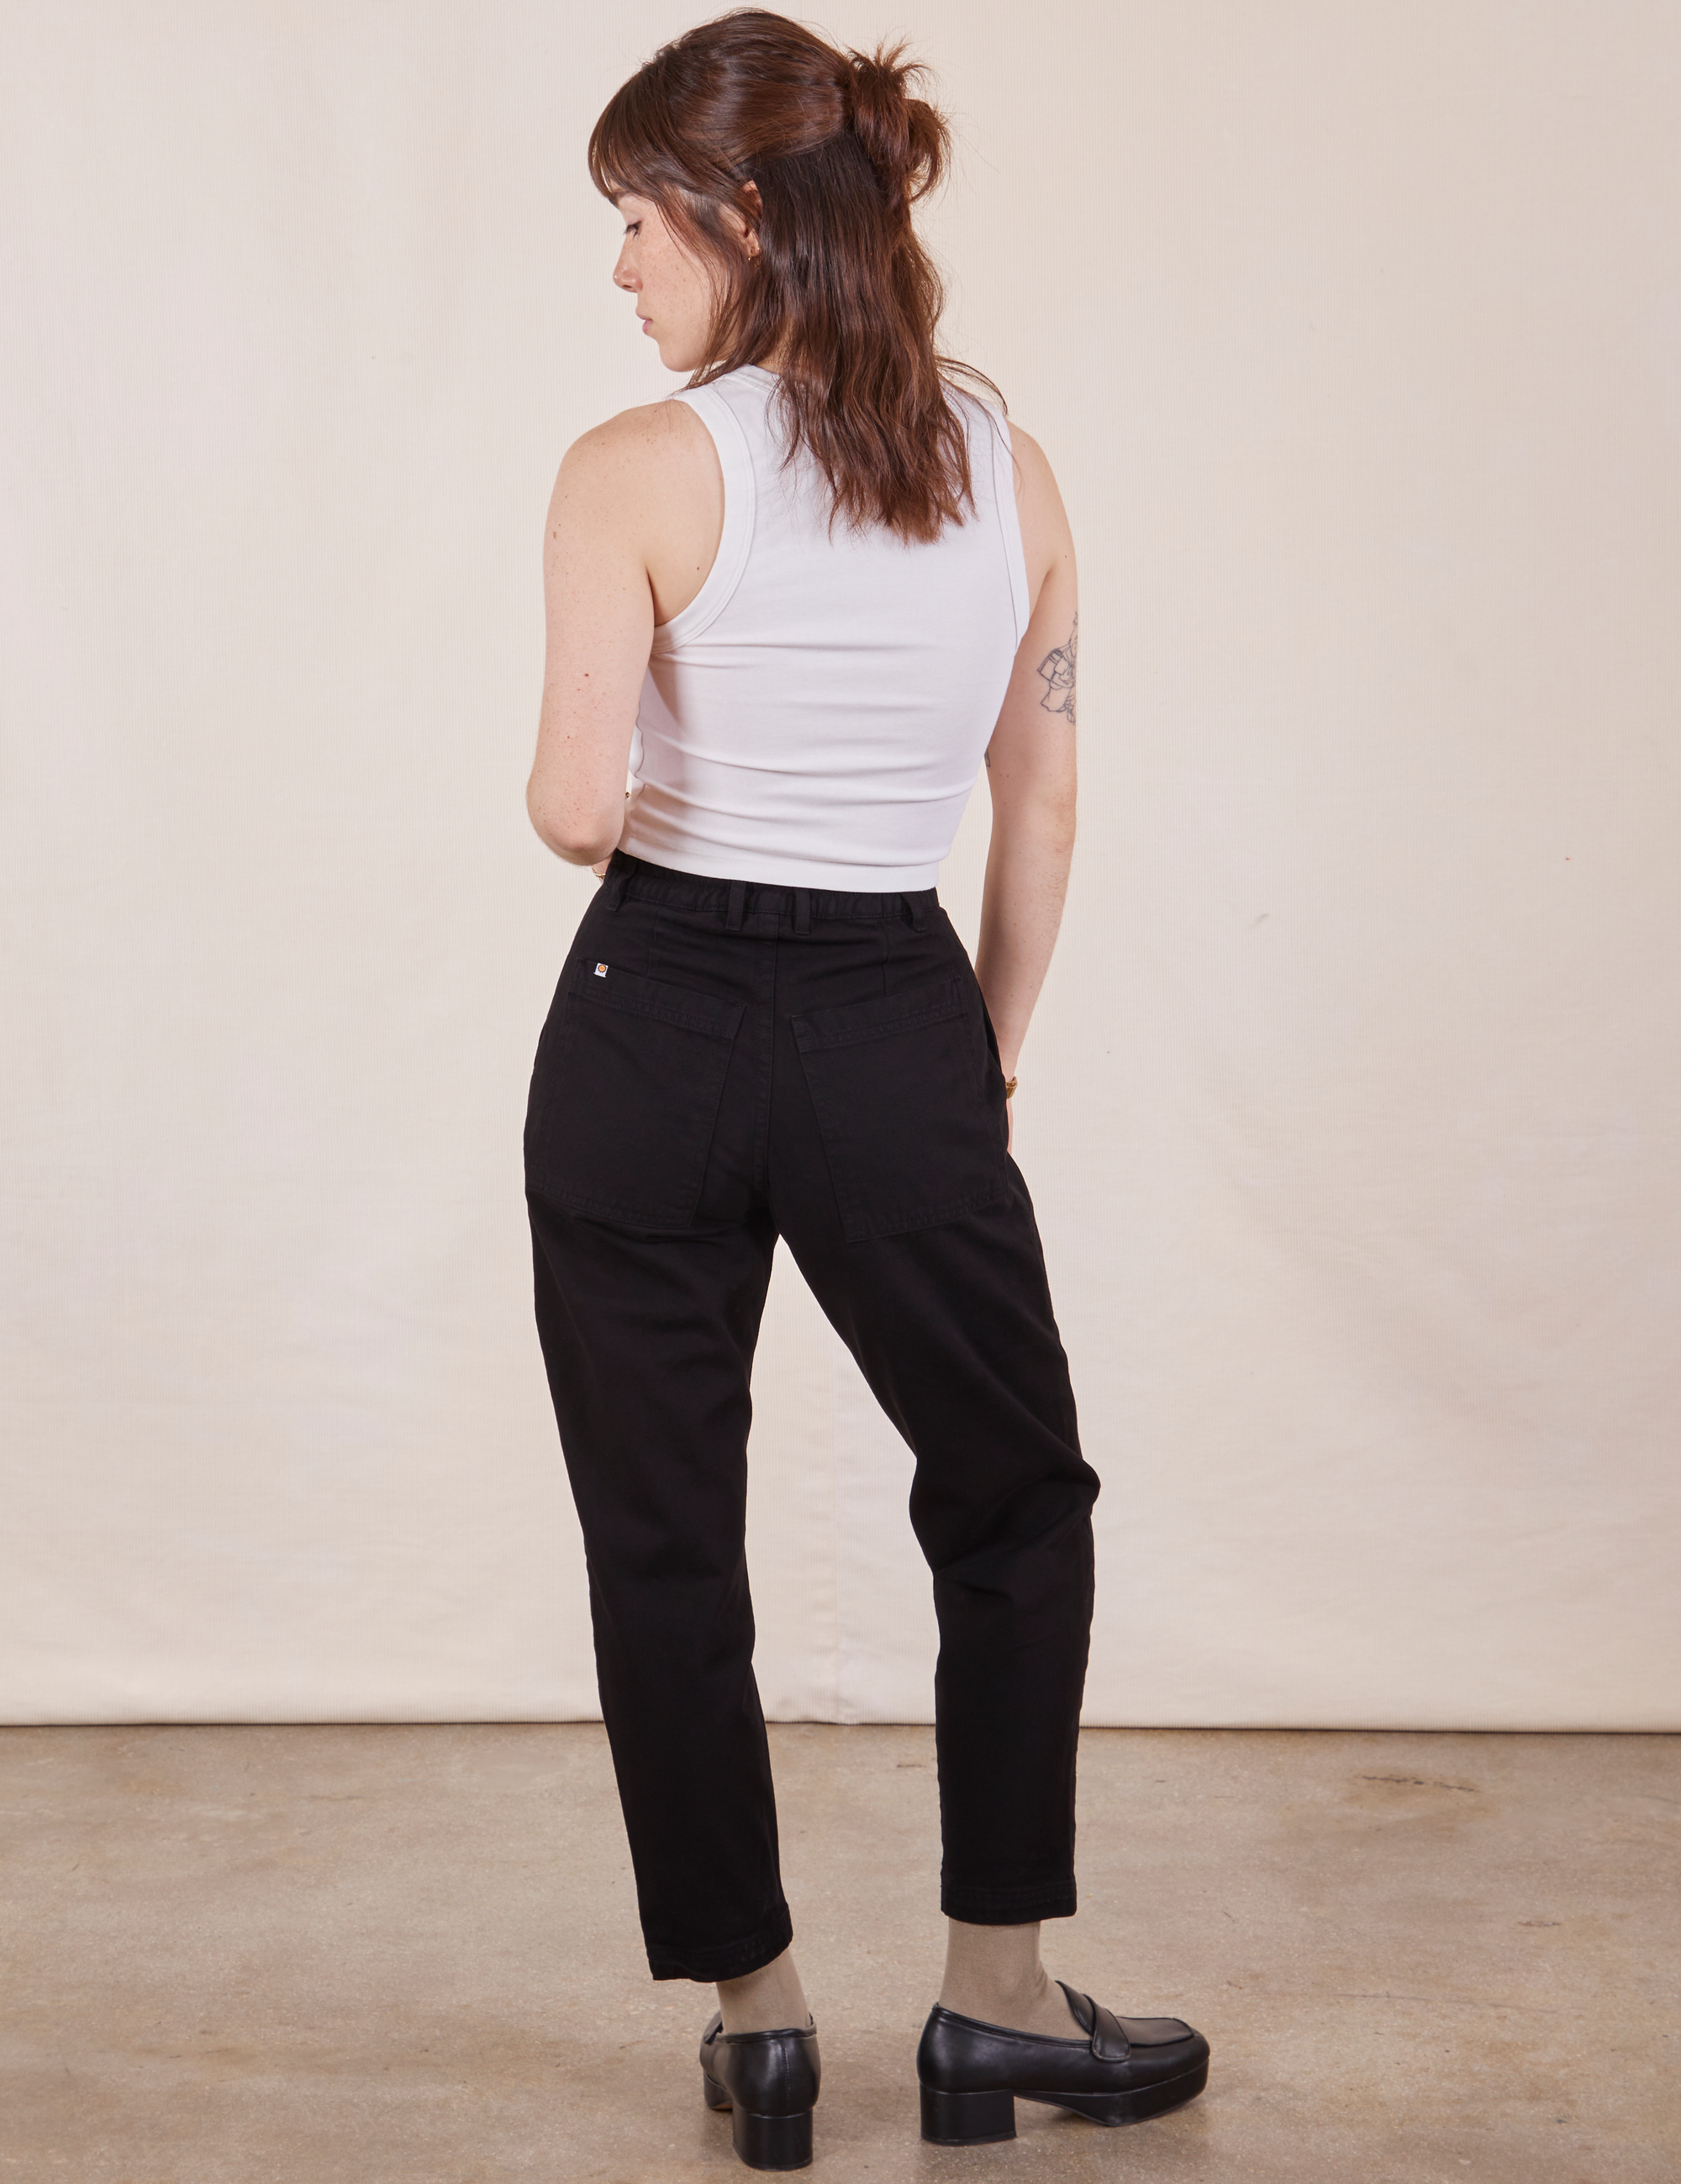 Back view of Petite Pencil Pants in Basic Black and vintage off-white Cropped Tank Top worn by Hana